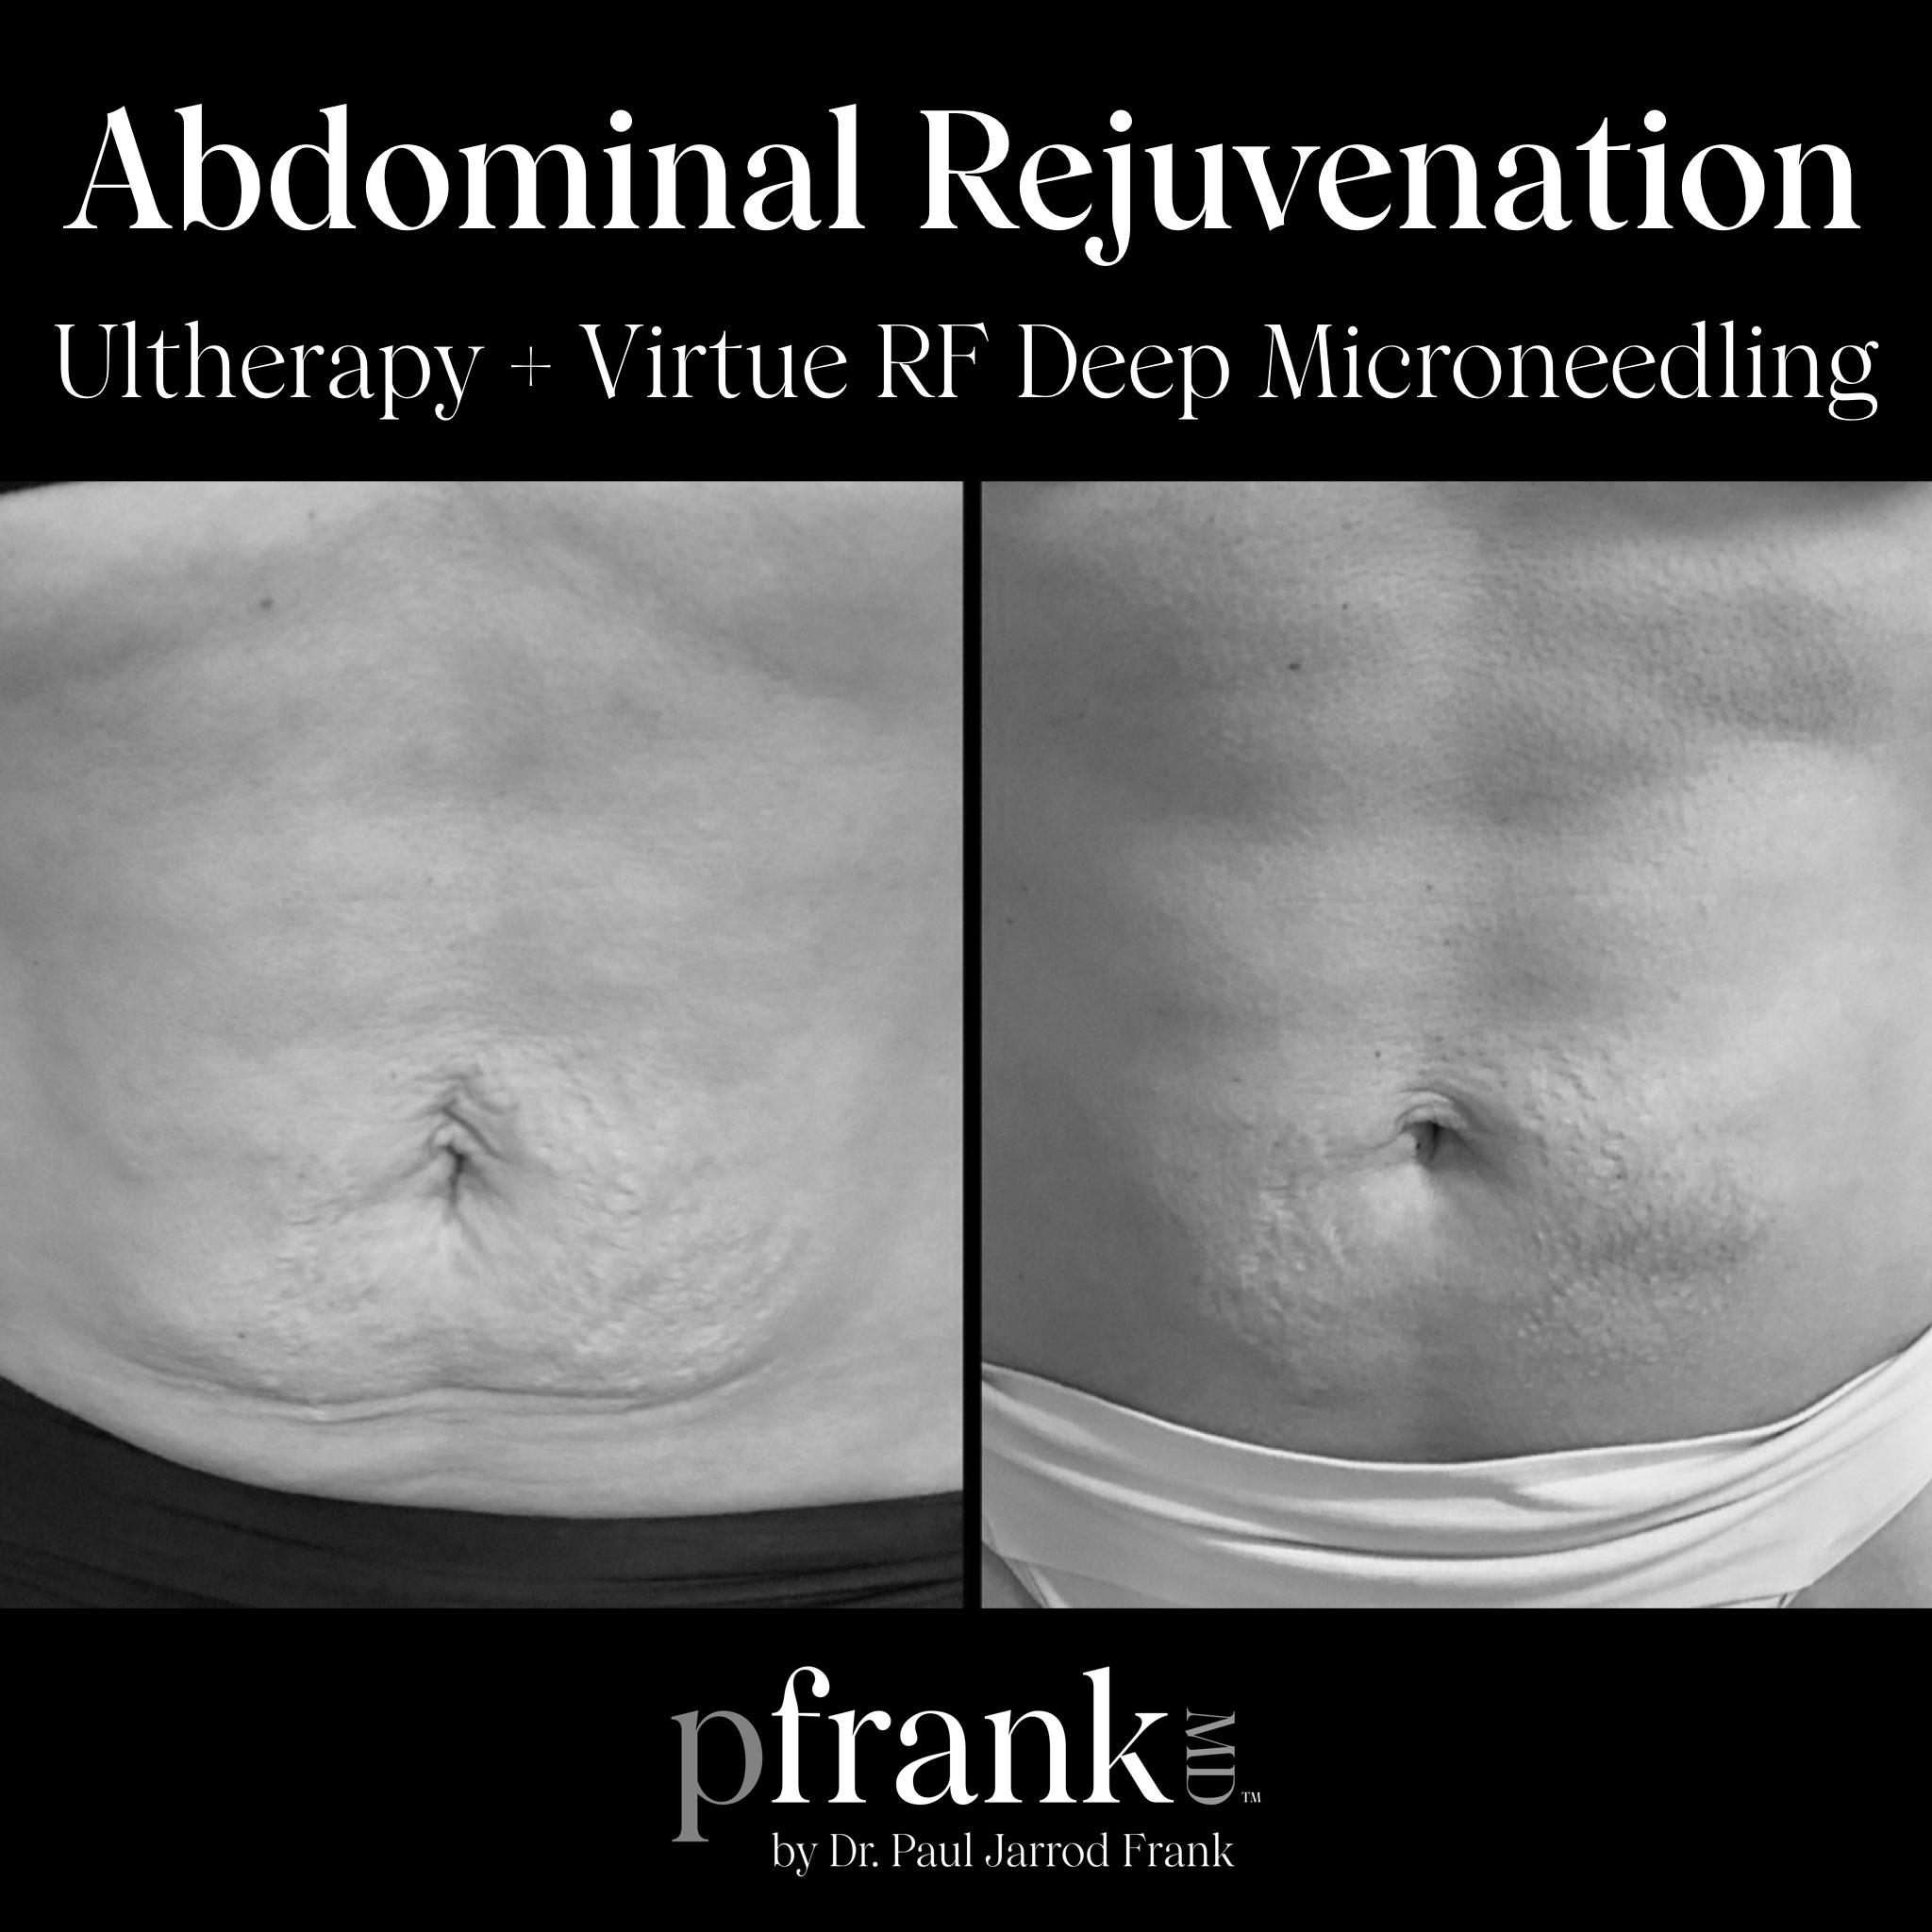 abdominal rejuvenation microneedling before and after